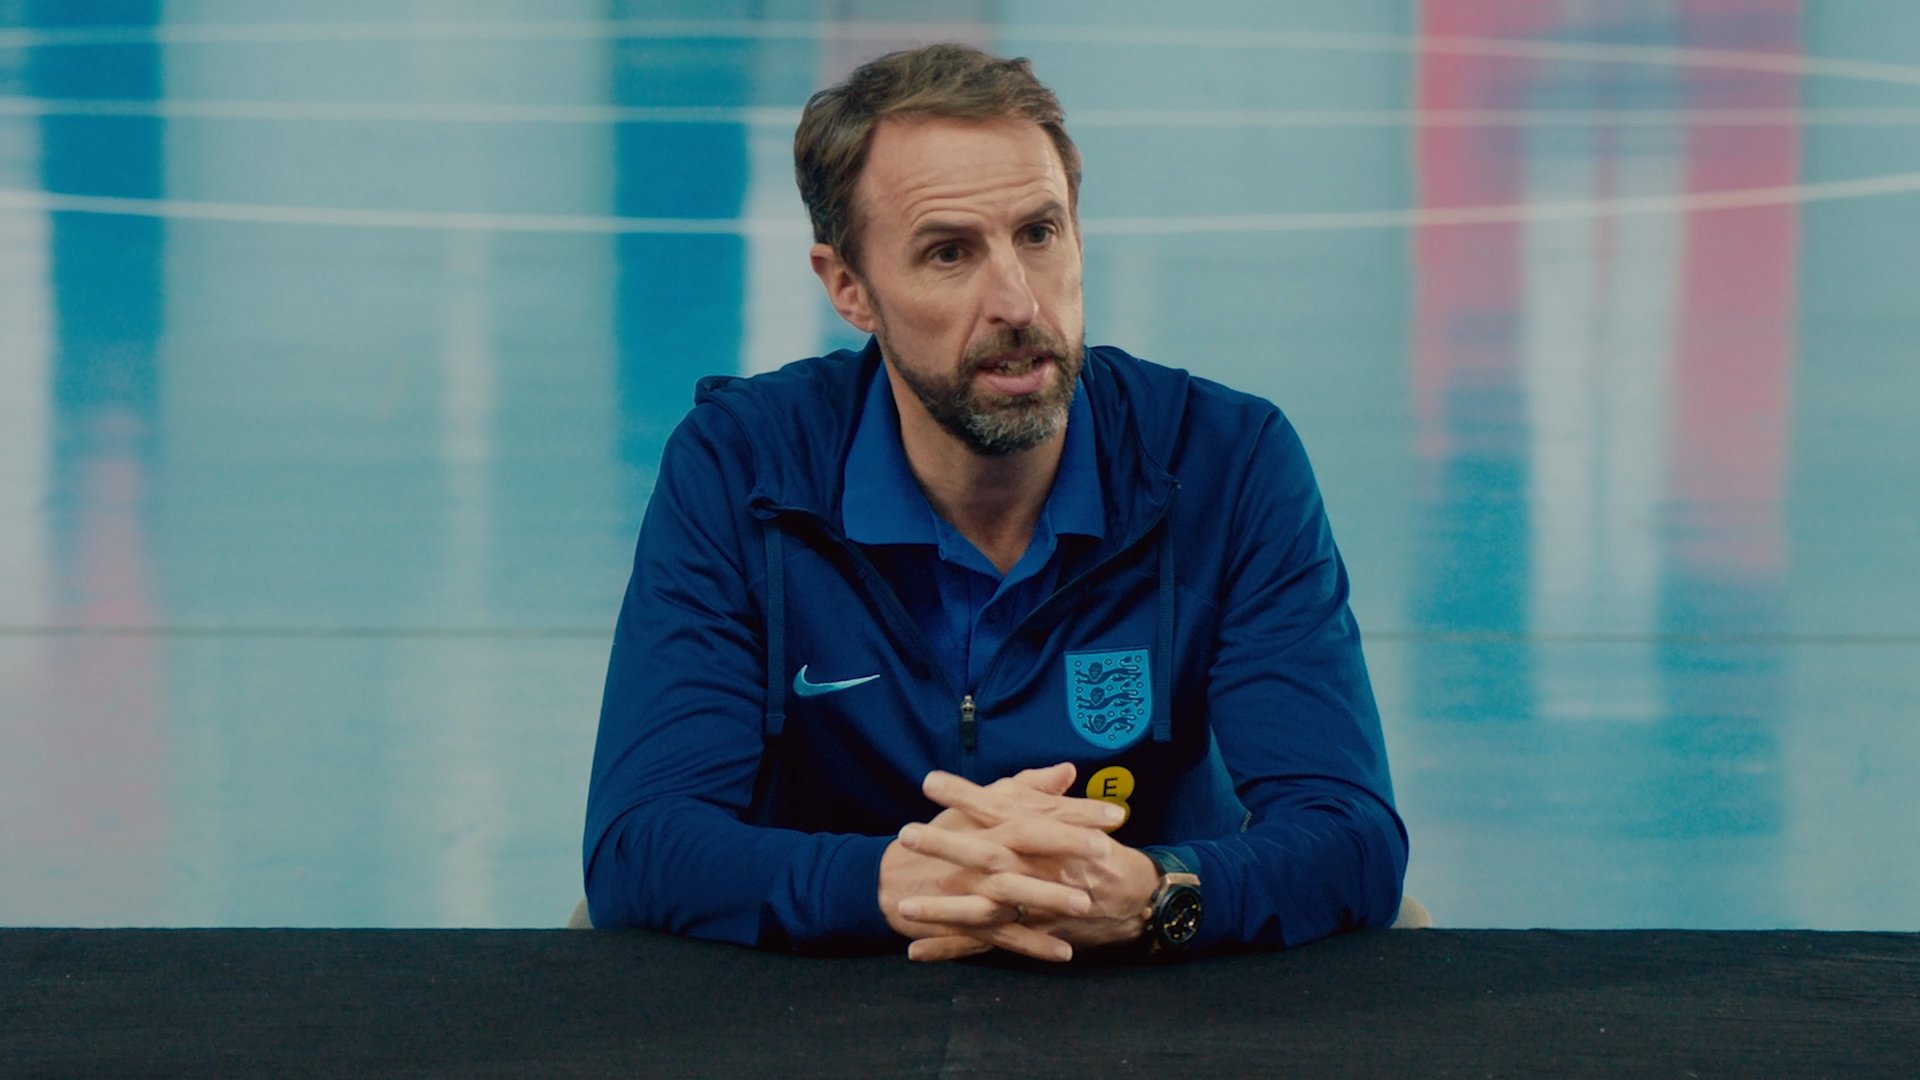 Delivery - M&S_Gareth Southgate_Kids Interview OPT 1 - 16x9_No Subs.00_00_10_16.Still003.jpg